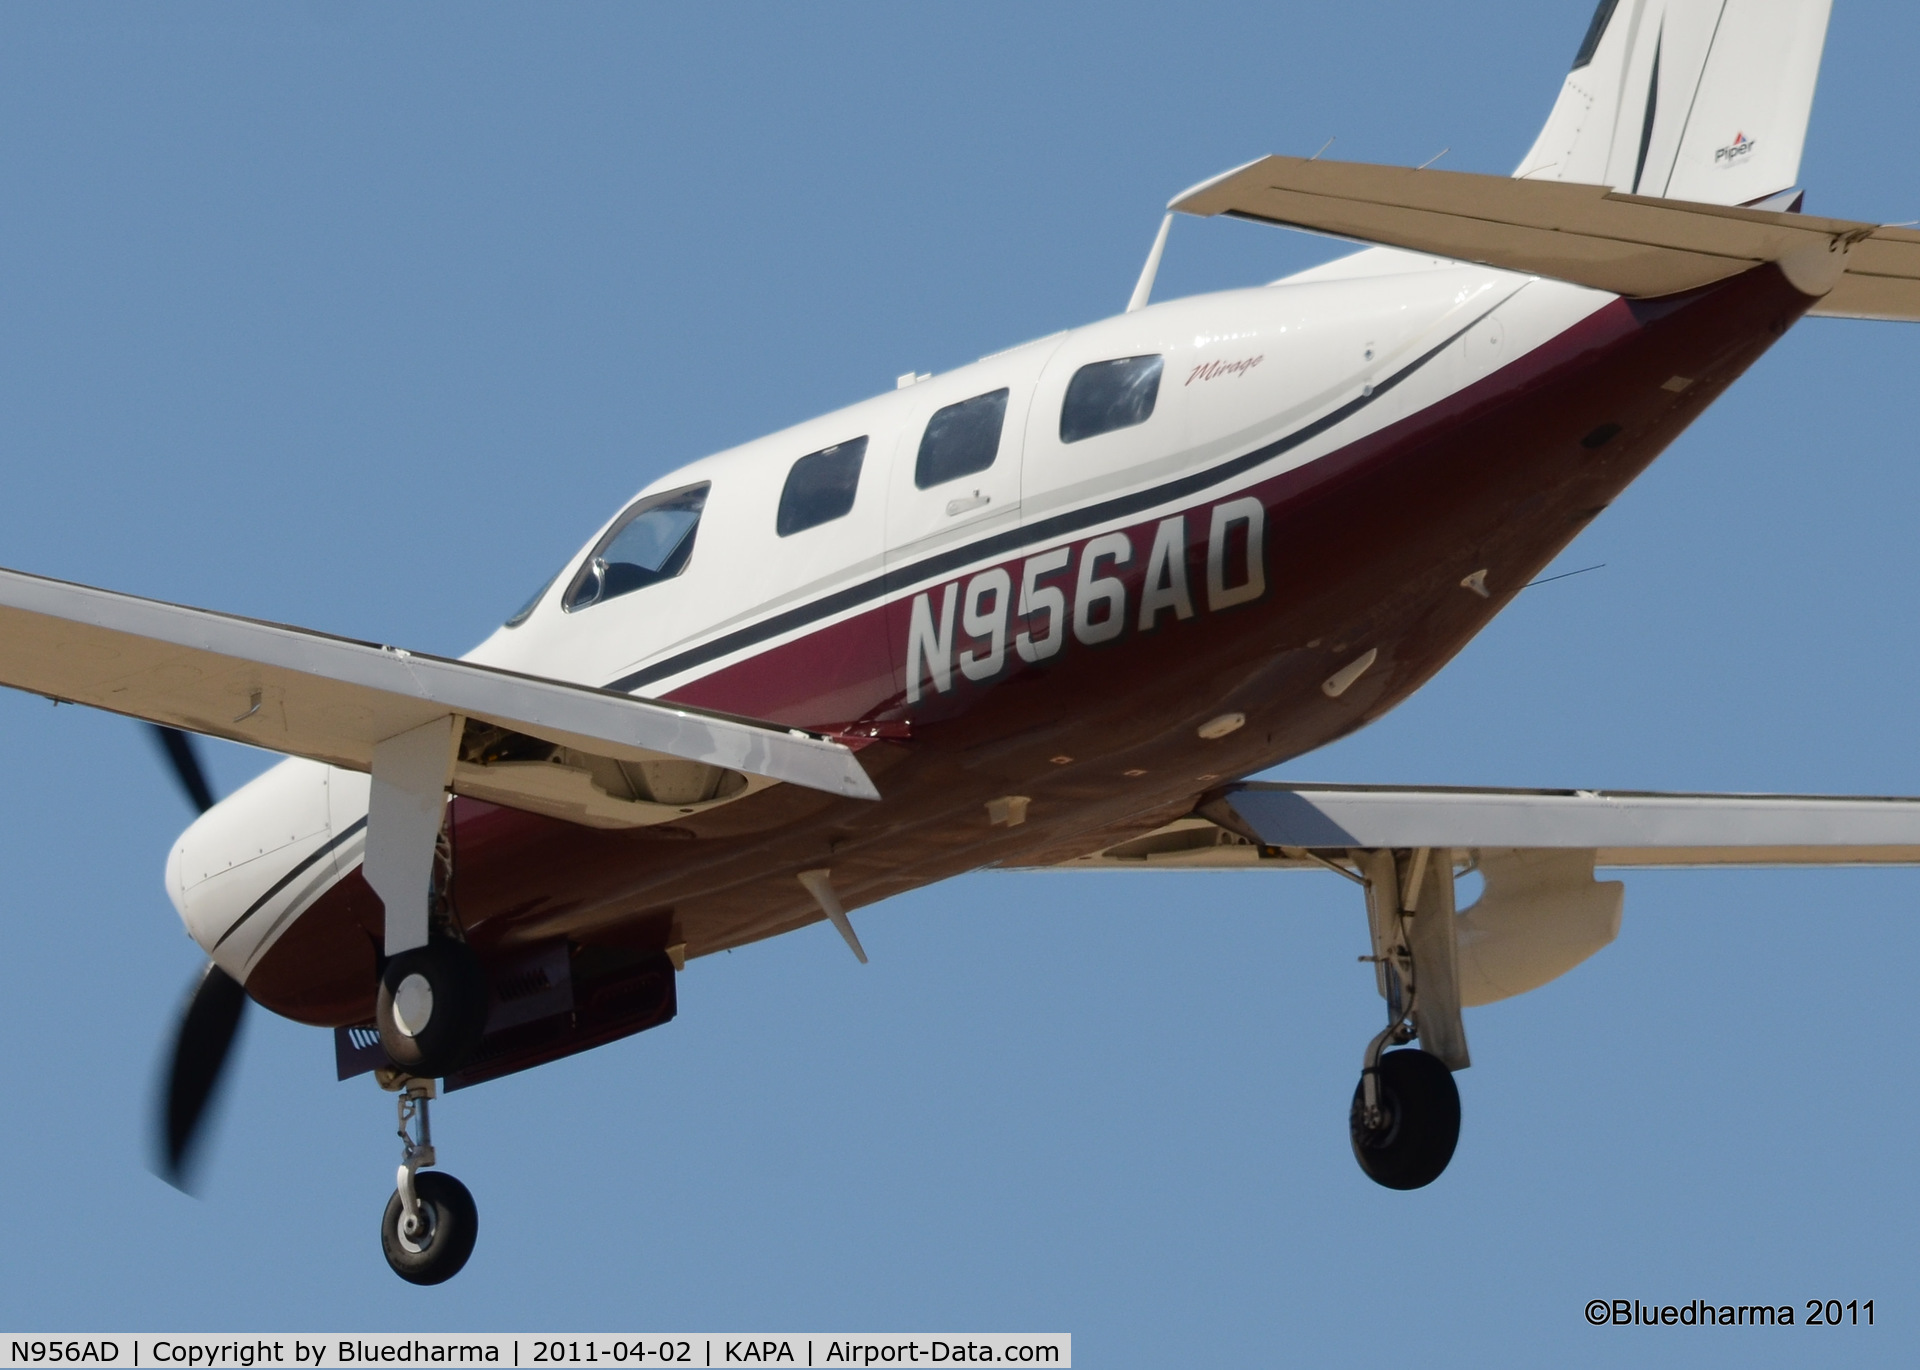 N956AD, 2006 Piper PA-46-350P Malibu Mirage C/N 4636385, 2006 New Piper PA46-350P (N956AD) on final approach.